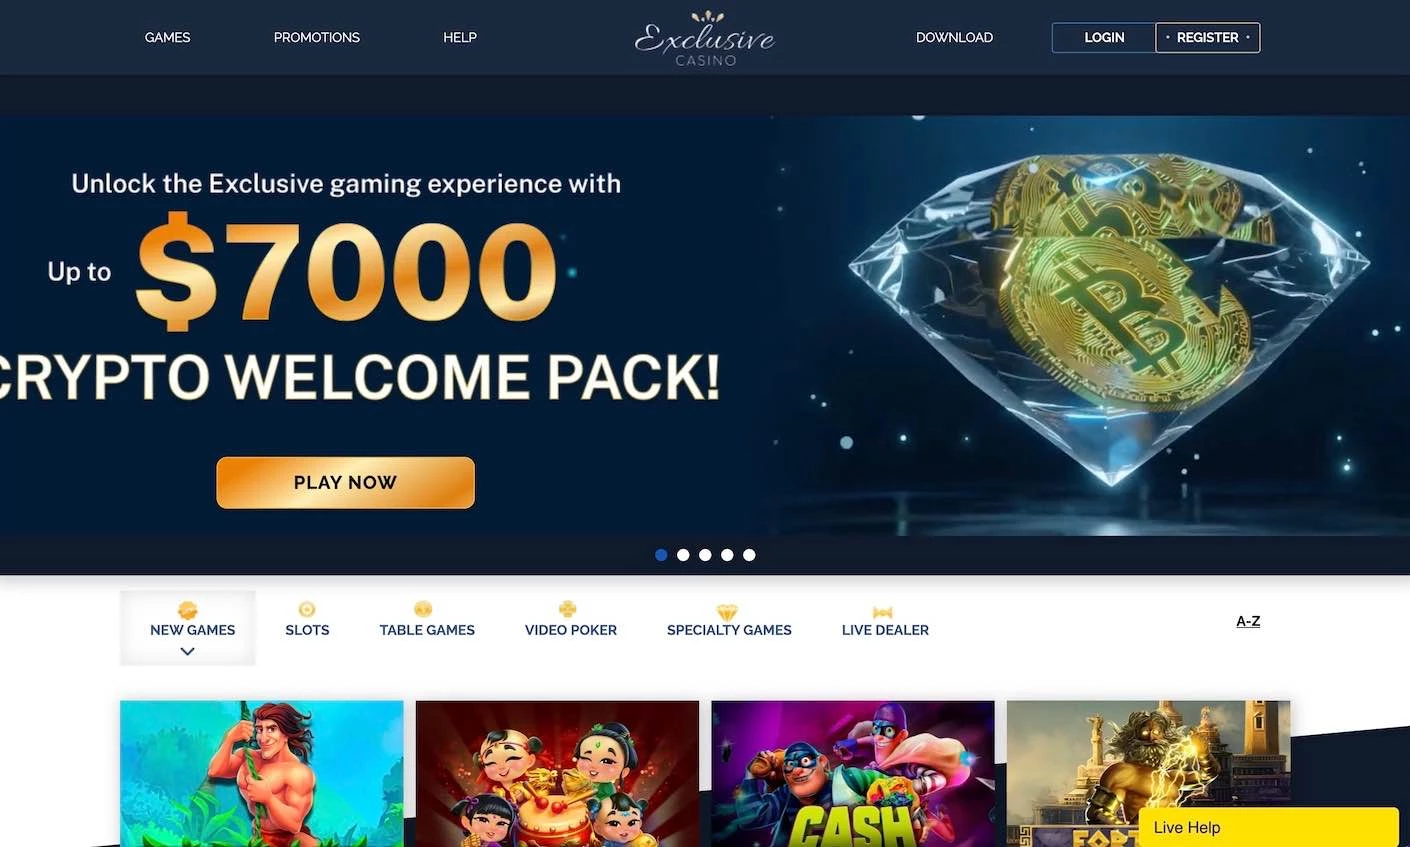 Exclusive Casino Main Page